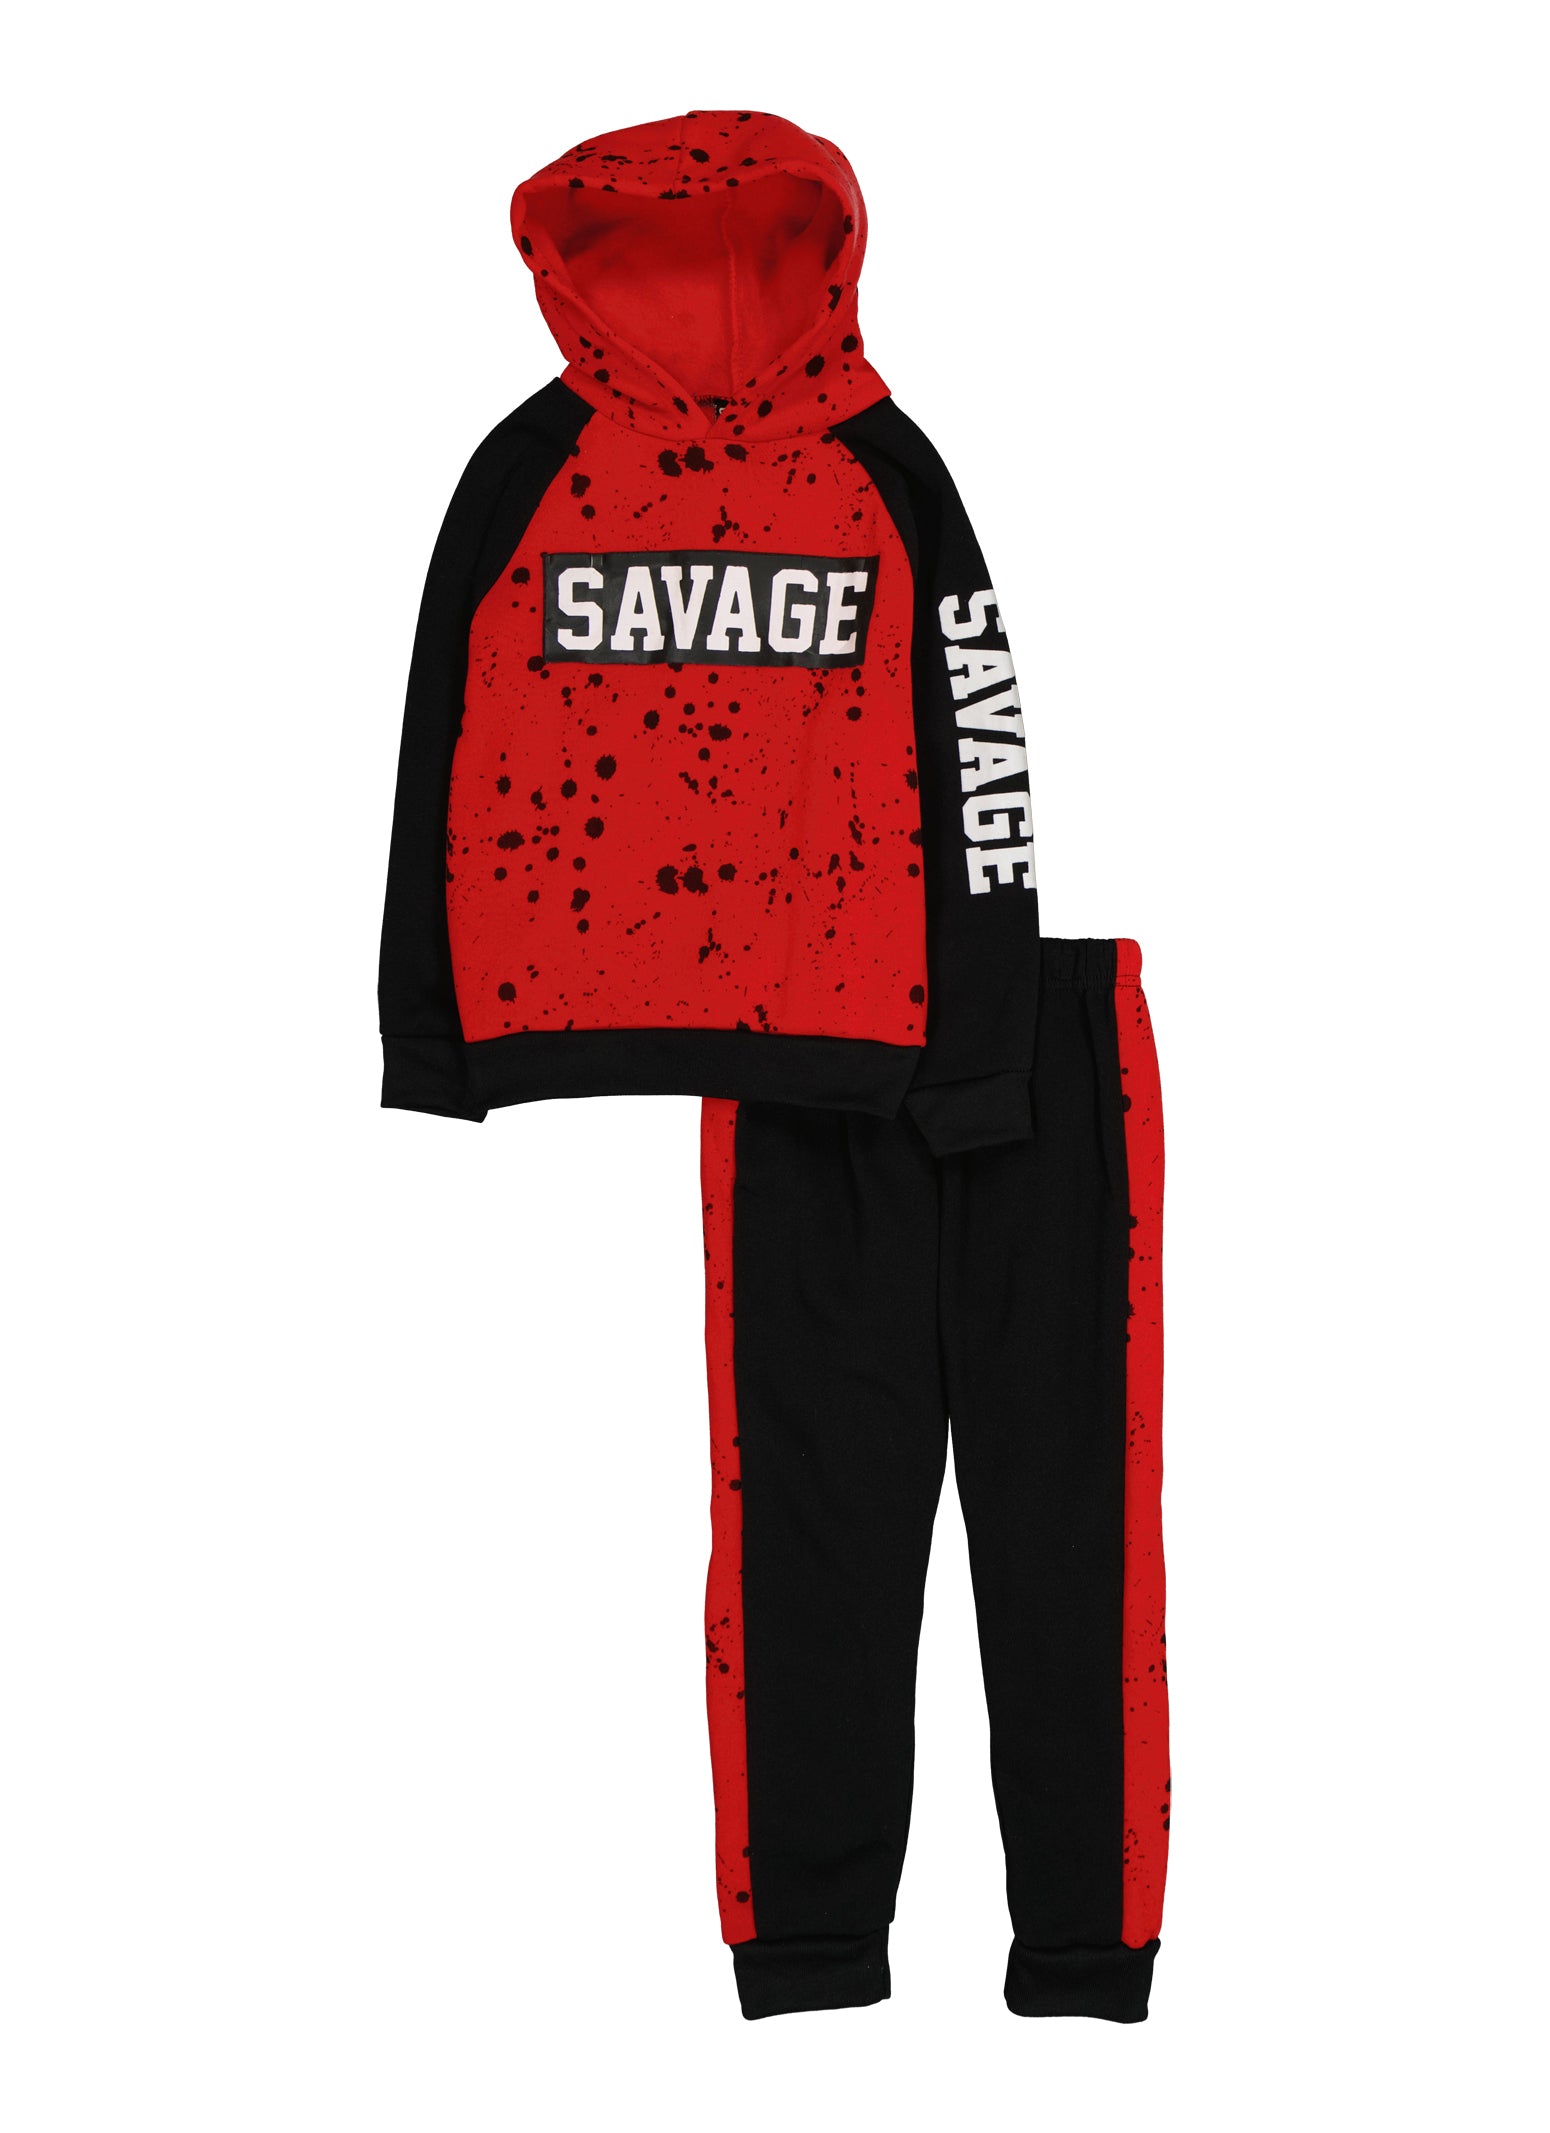 Little Boys Savage Paint Splatter Hoodie and Joggers, Red, Size 4